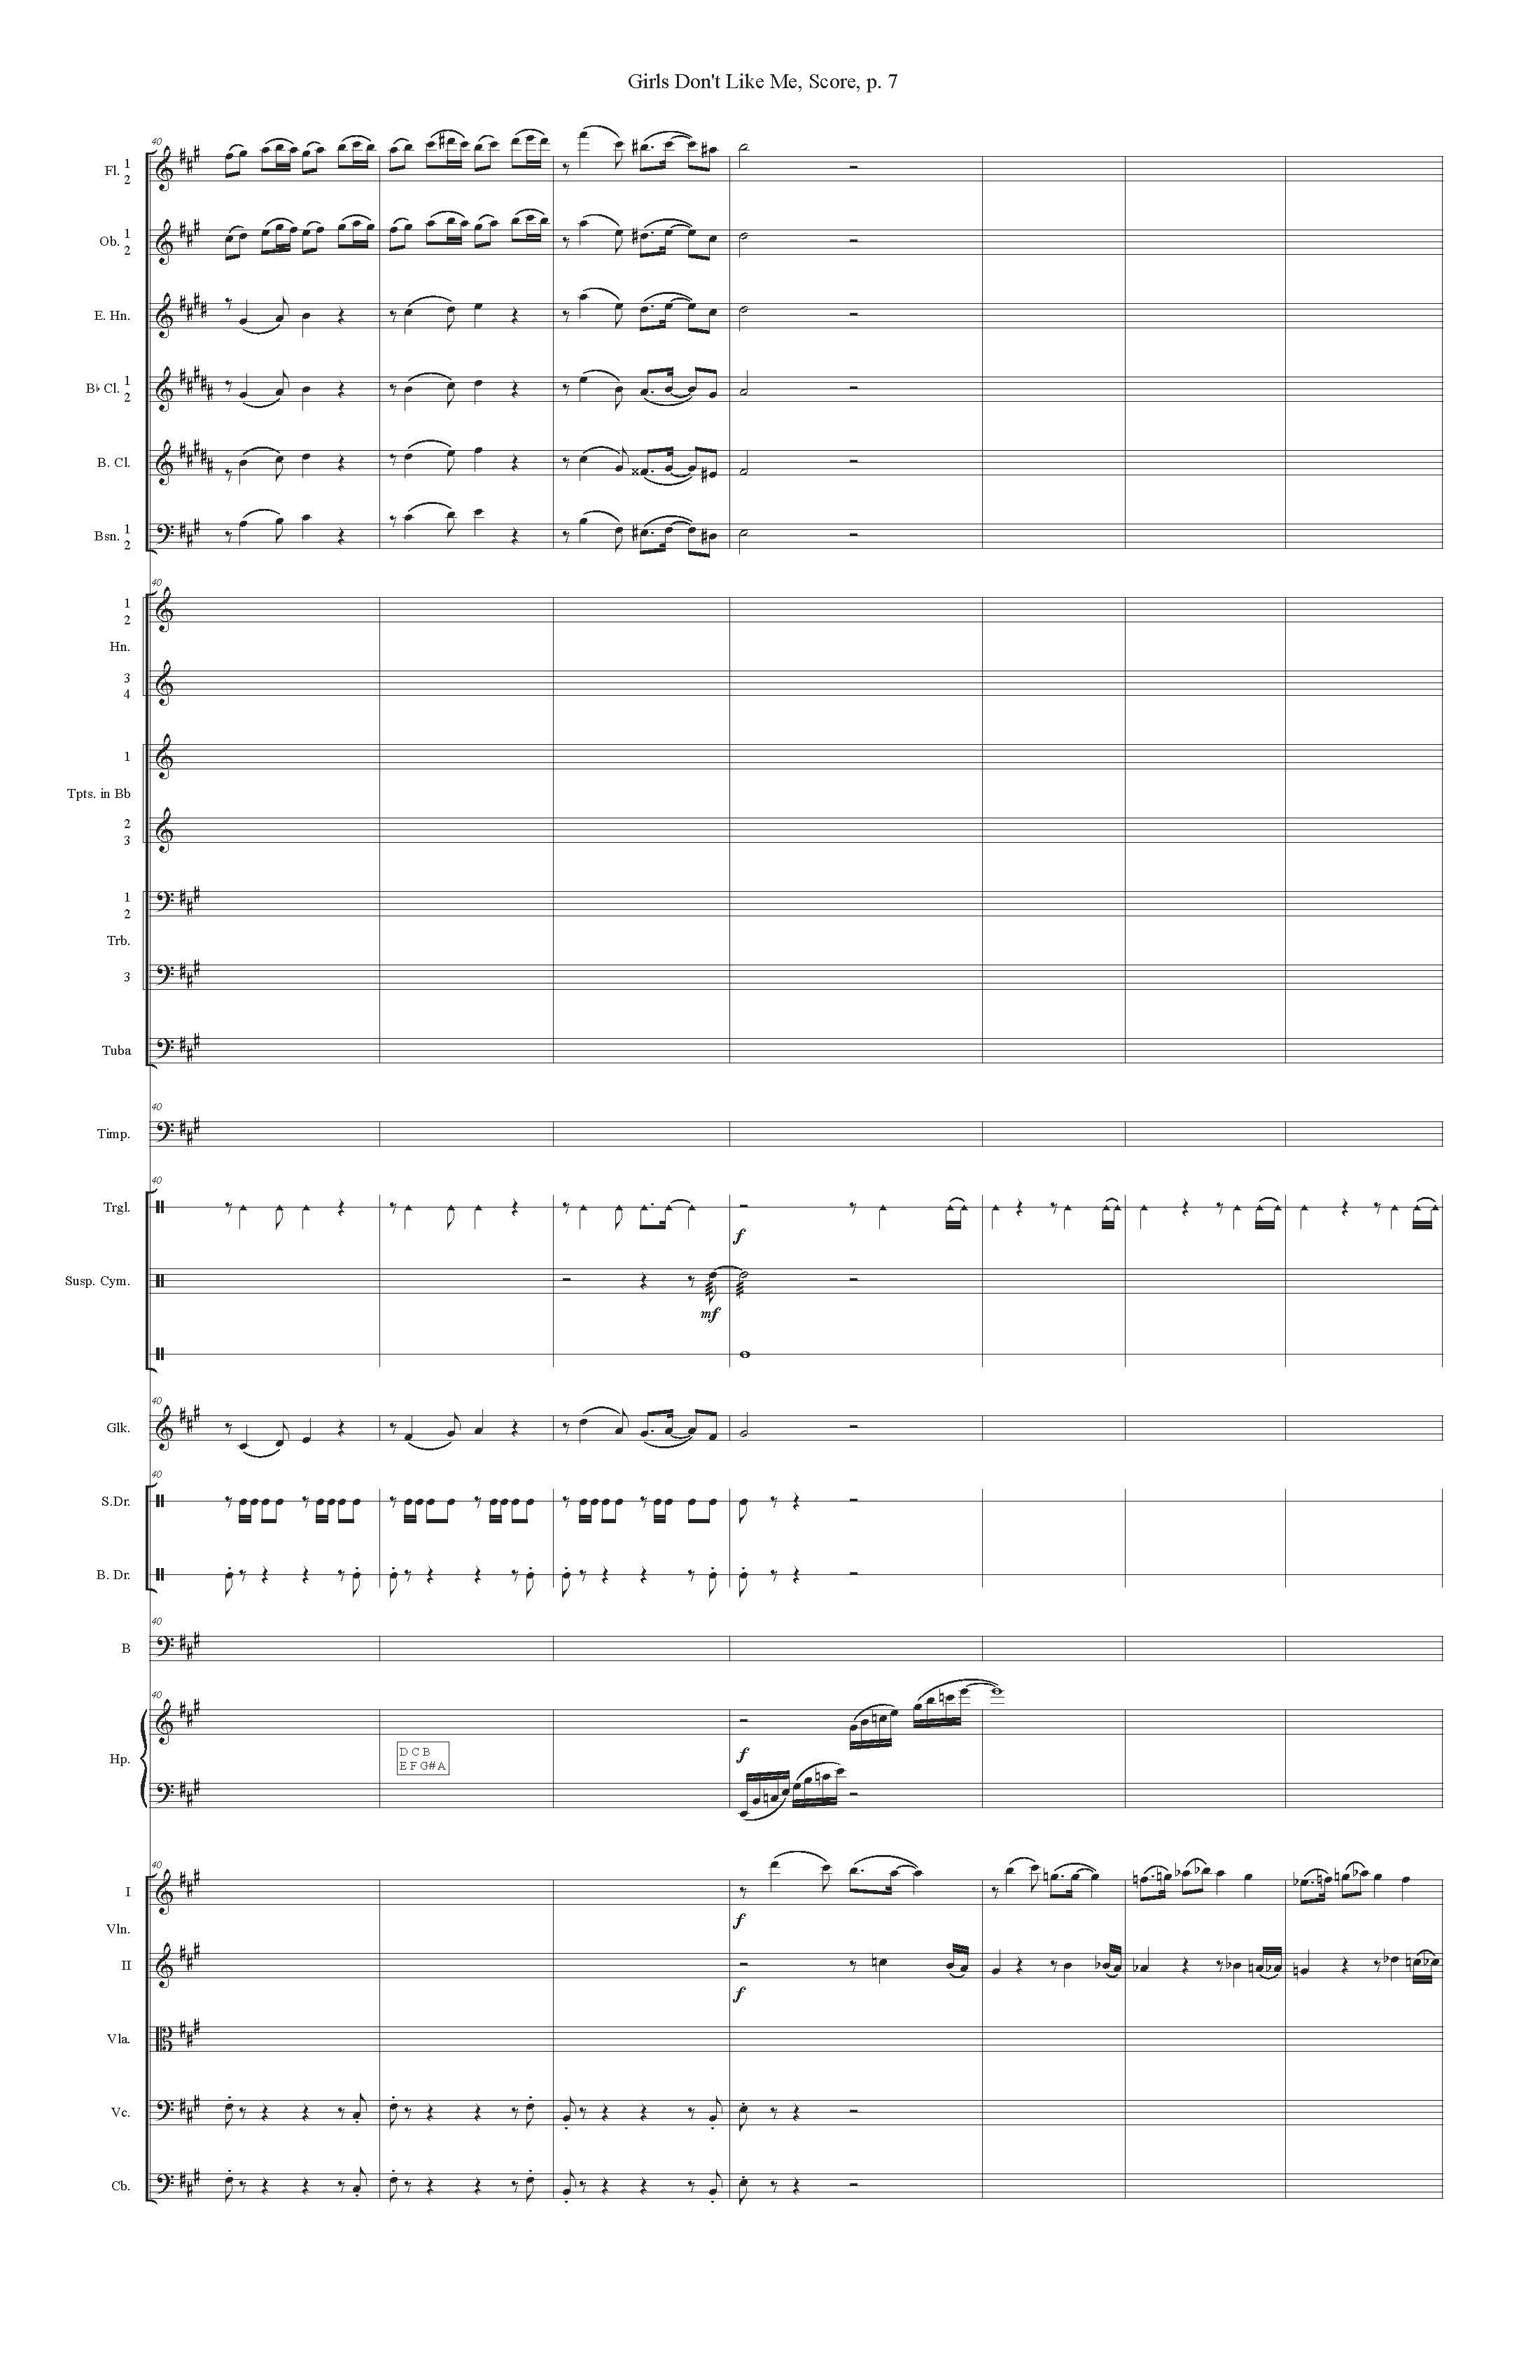 GIRLS DON'T LIKE ME ORCH - Score_Page_07.jpg